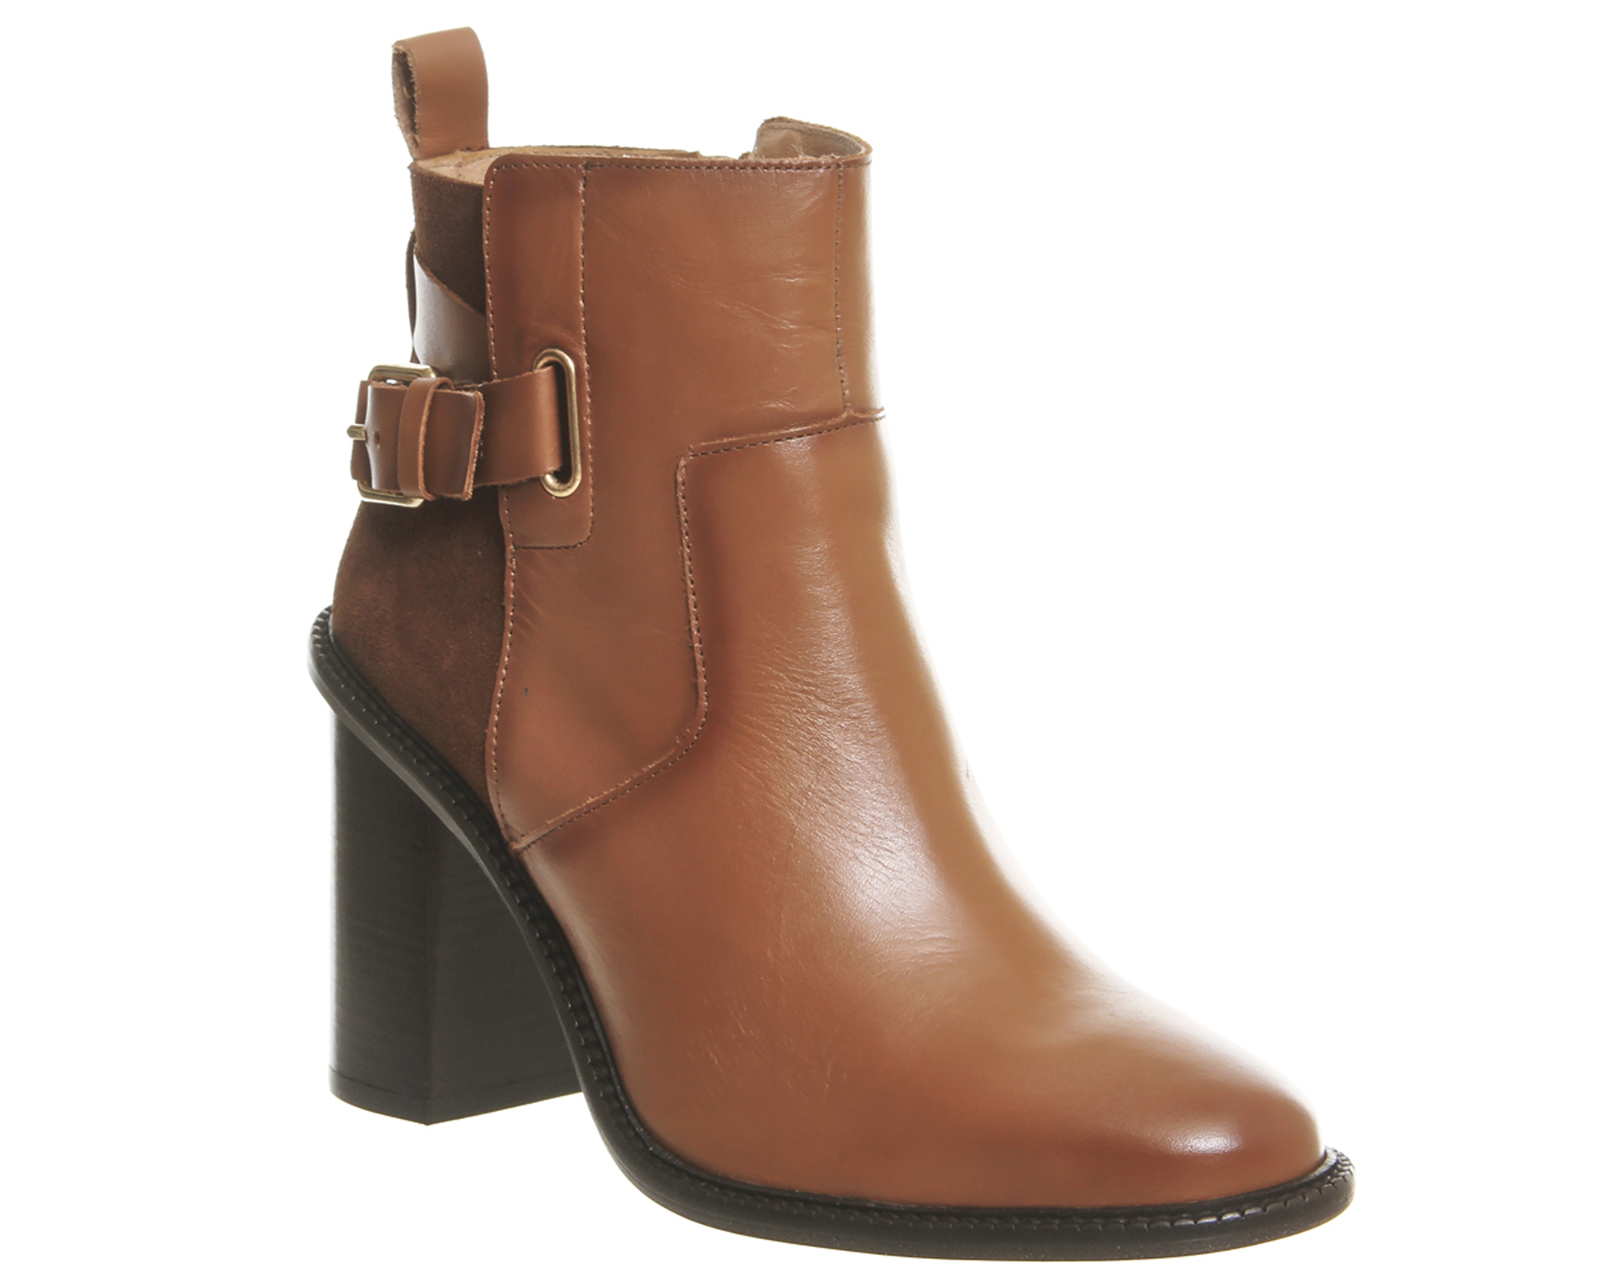 OFFICELively Smart Heeled BootsTan Leather Suede